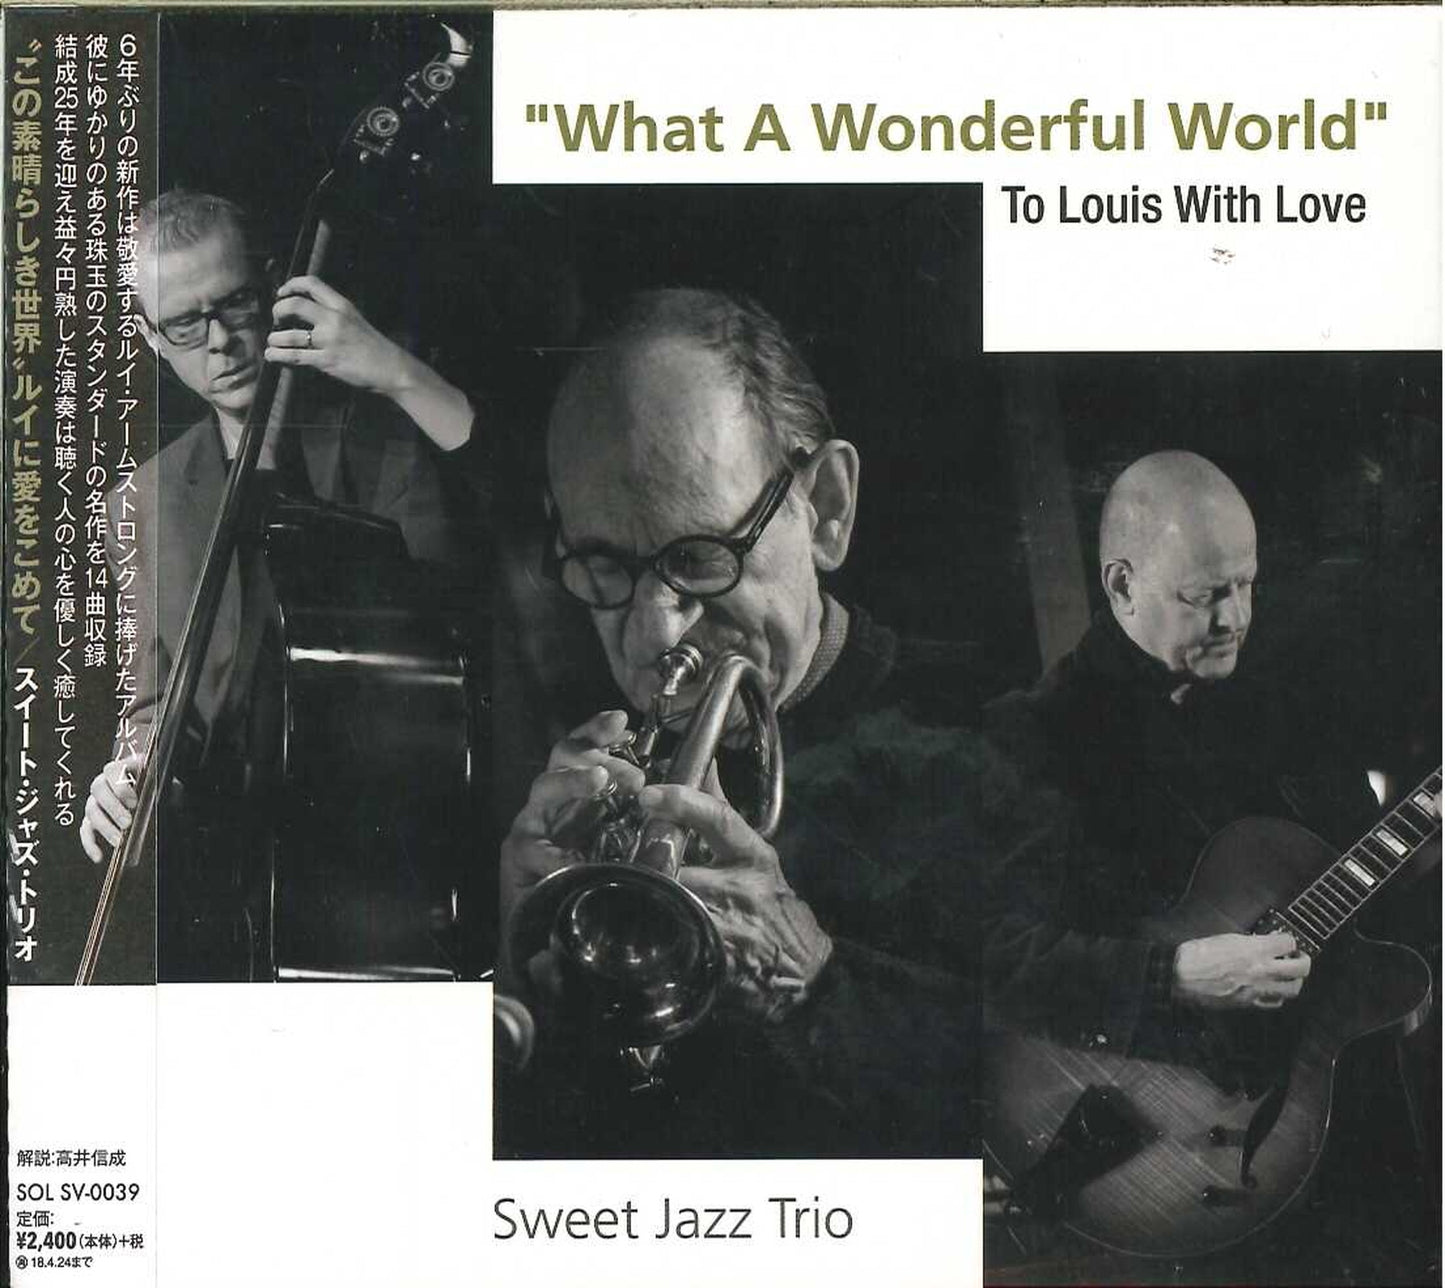 Sweetjazz Trio - What A Wonderful World To Louis With Love - Japan CD